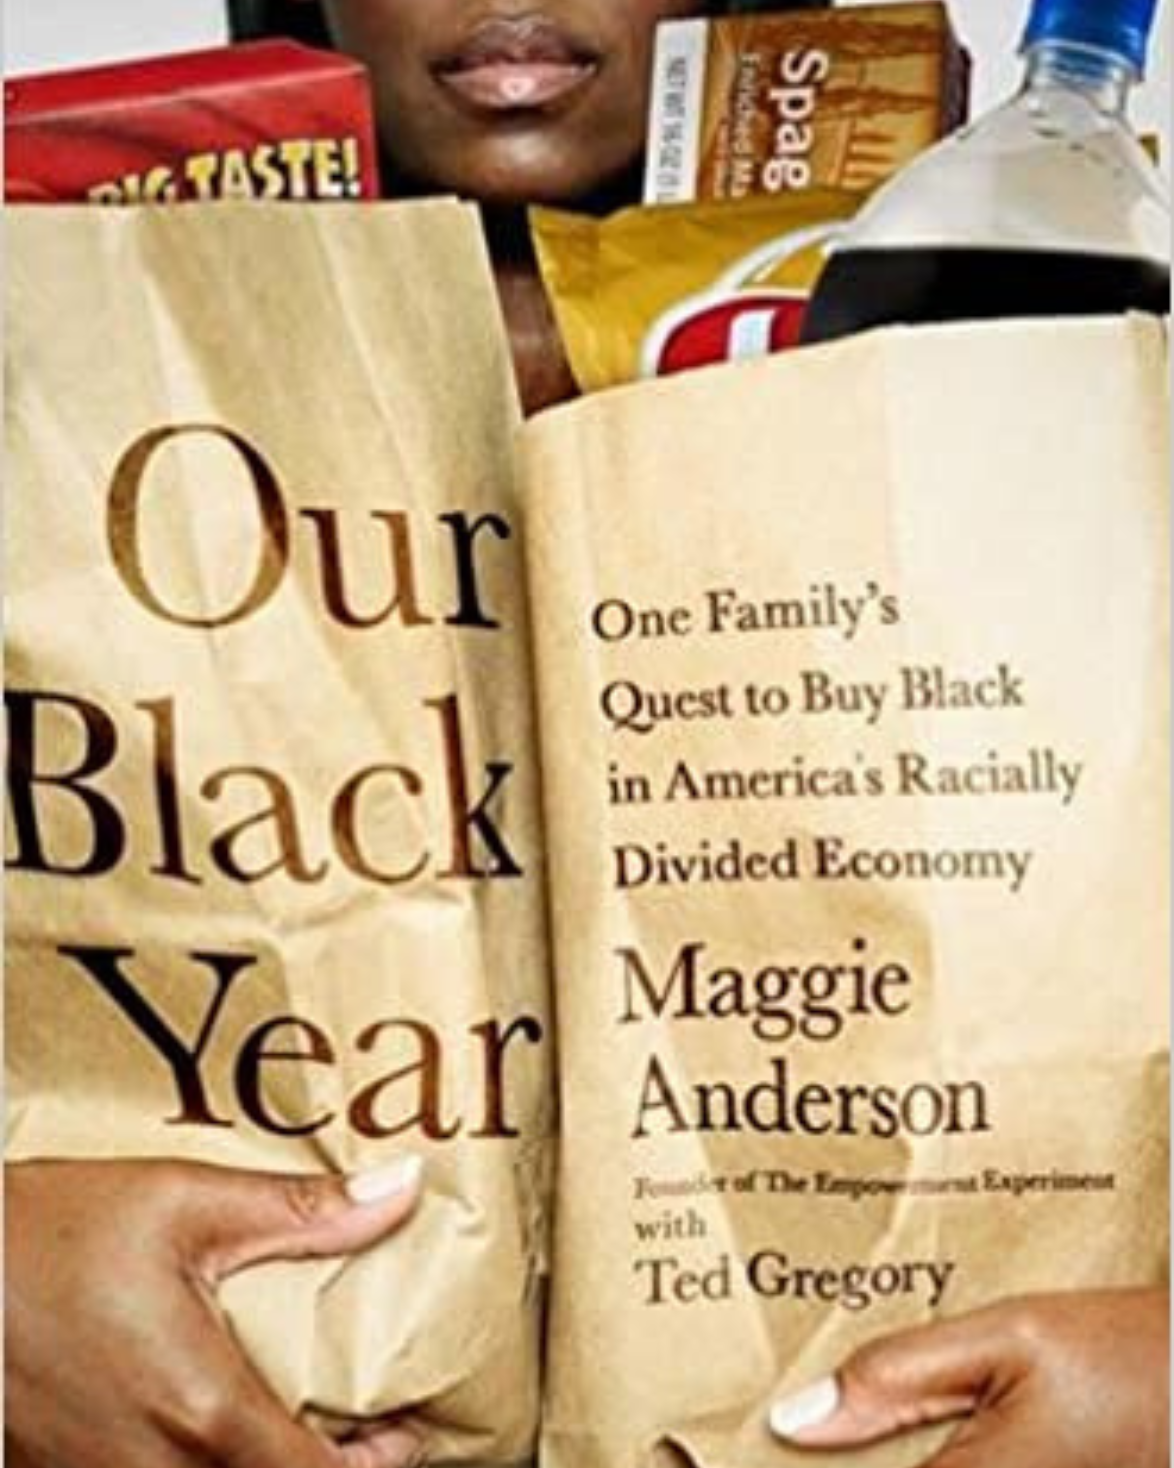 Our Black Year: One Family's Quest to Buy Black in Our Black Year